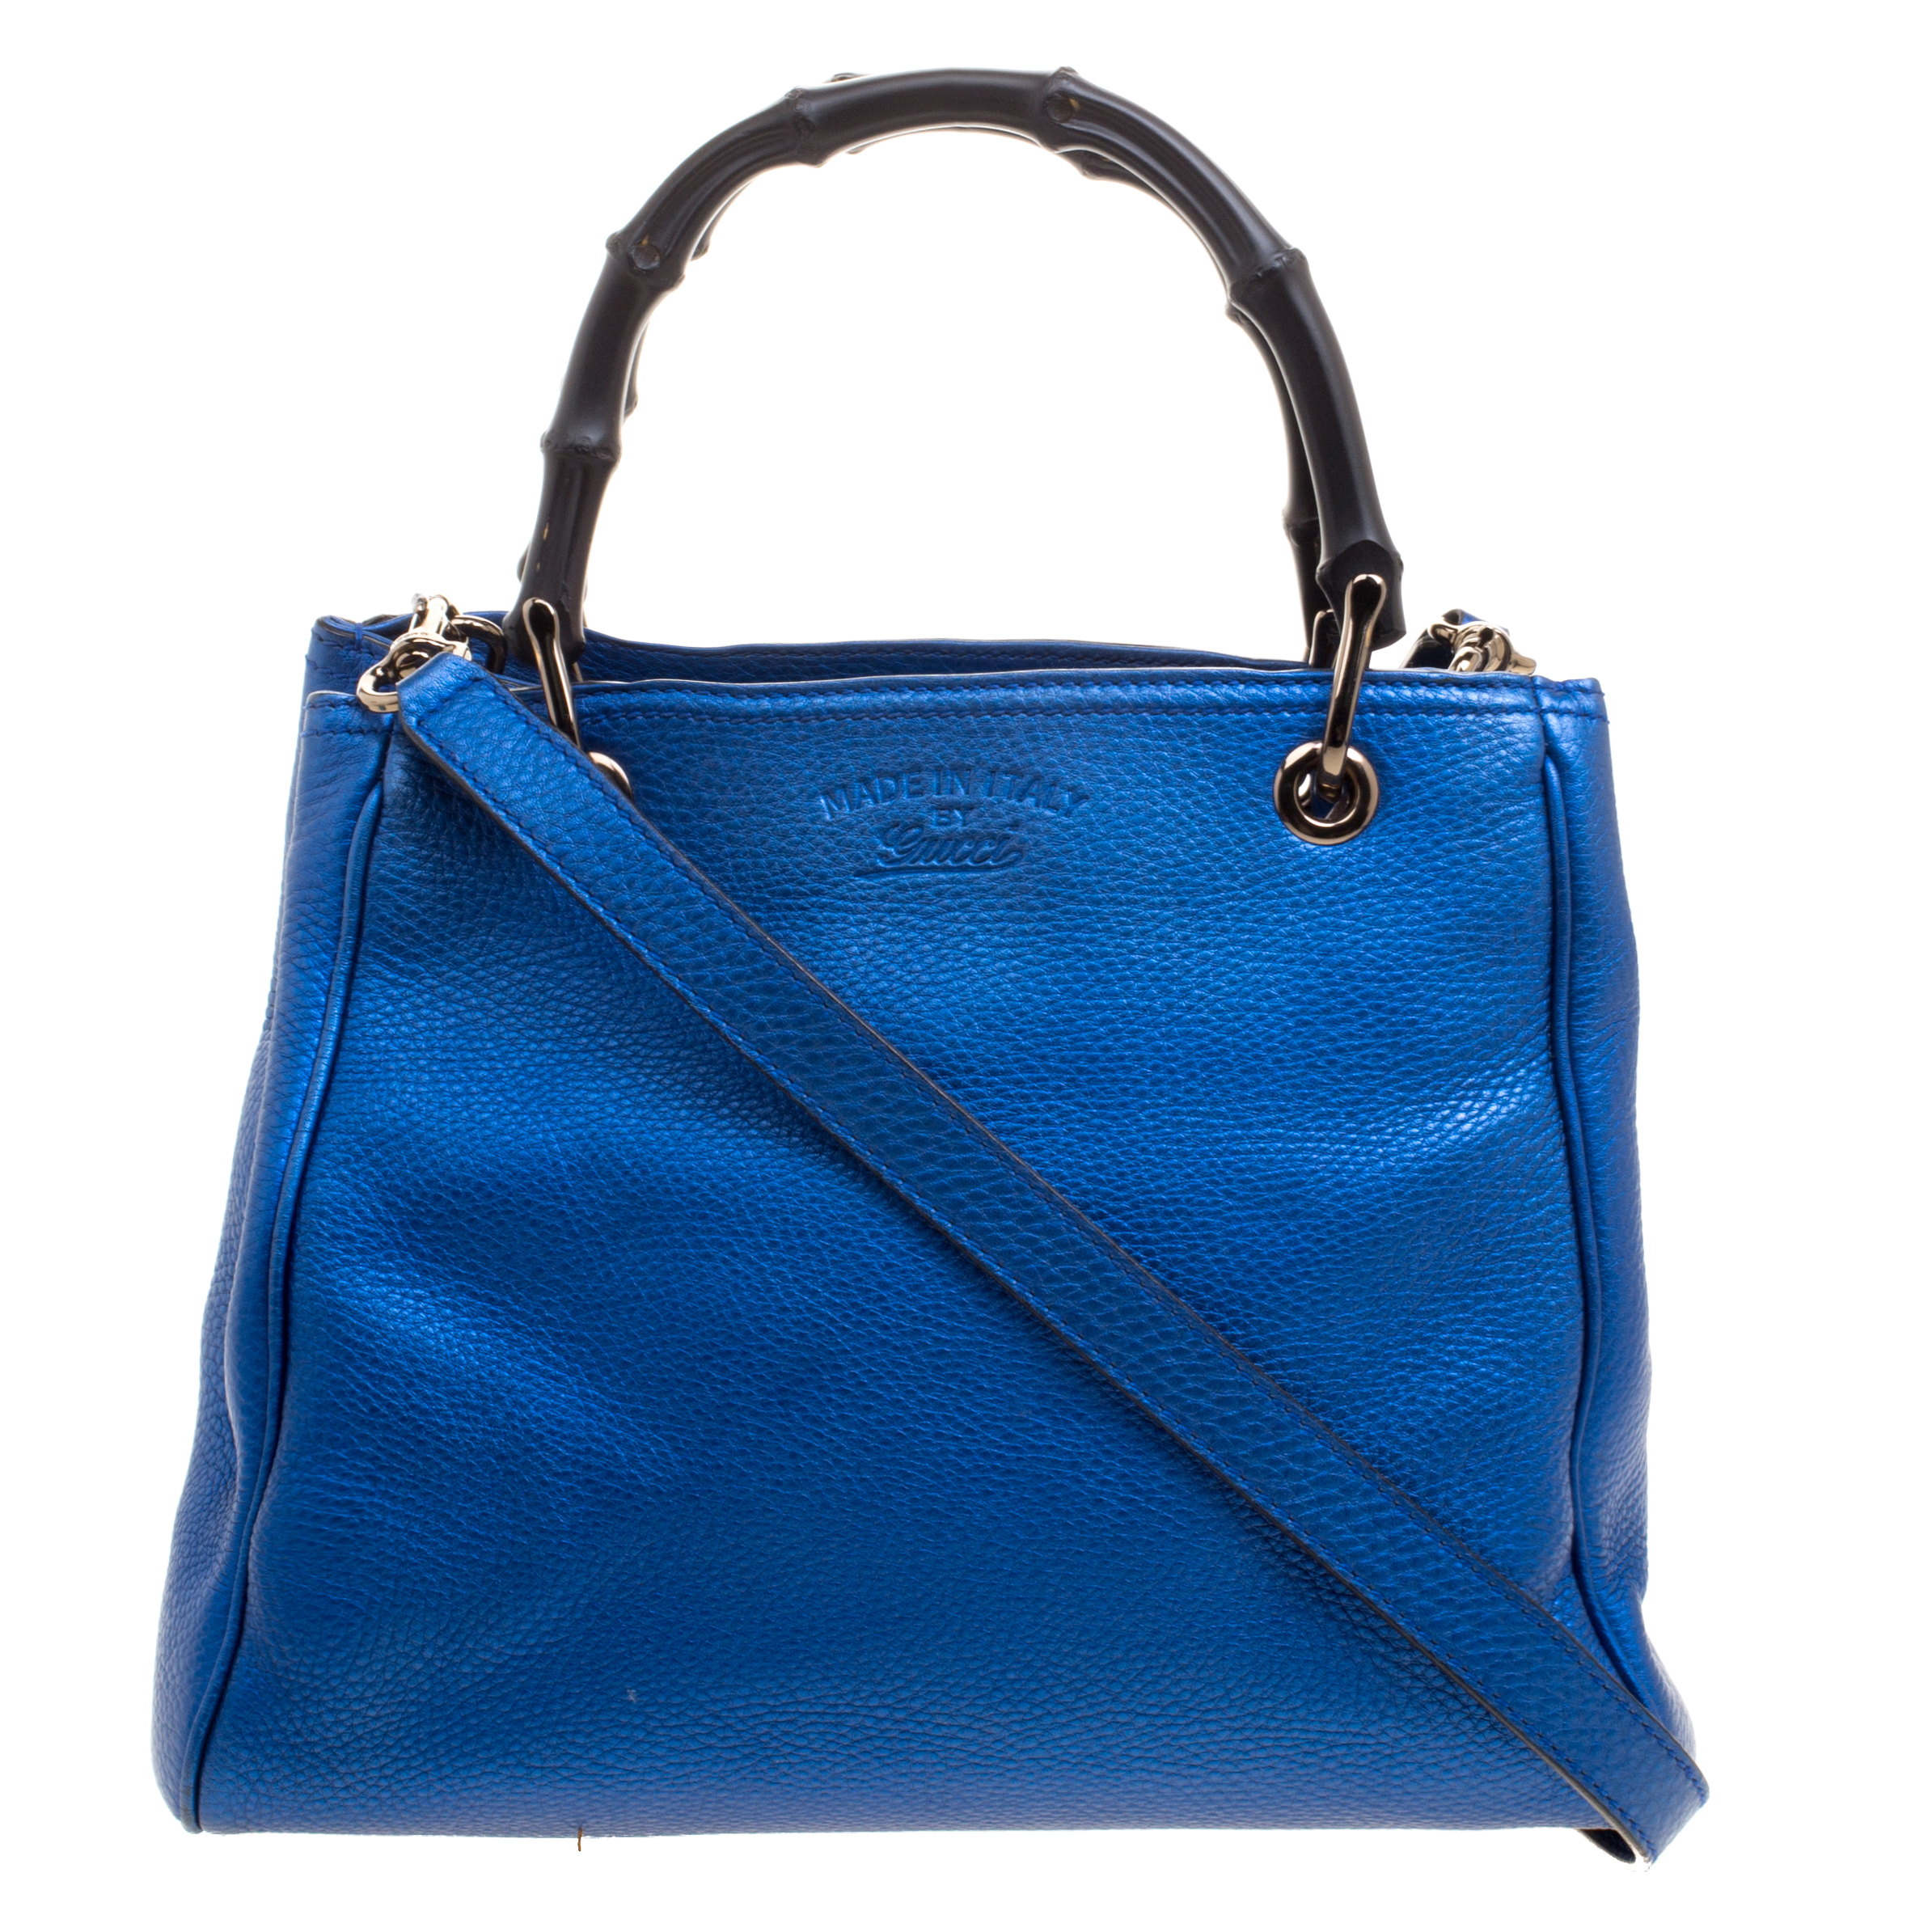 Gucci Metallic Blue Leather Small Bamboo Top Handle Shopper Tote